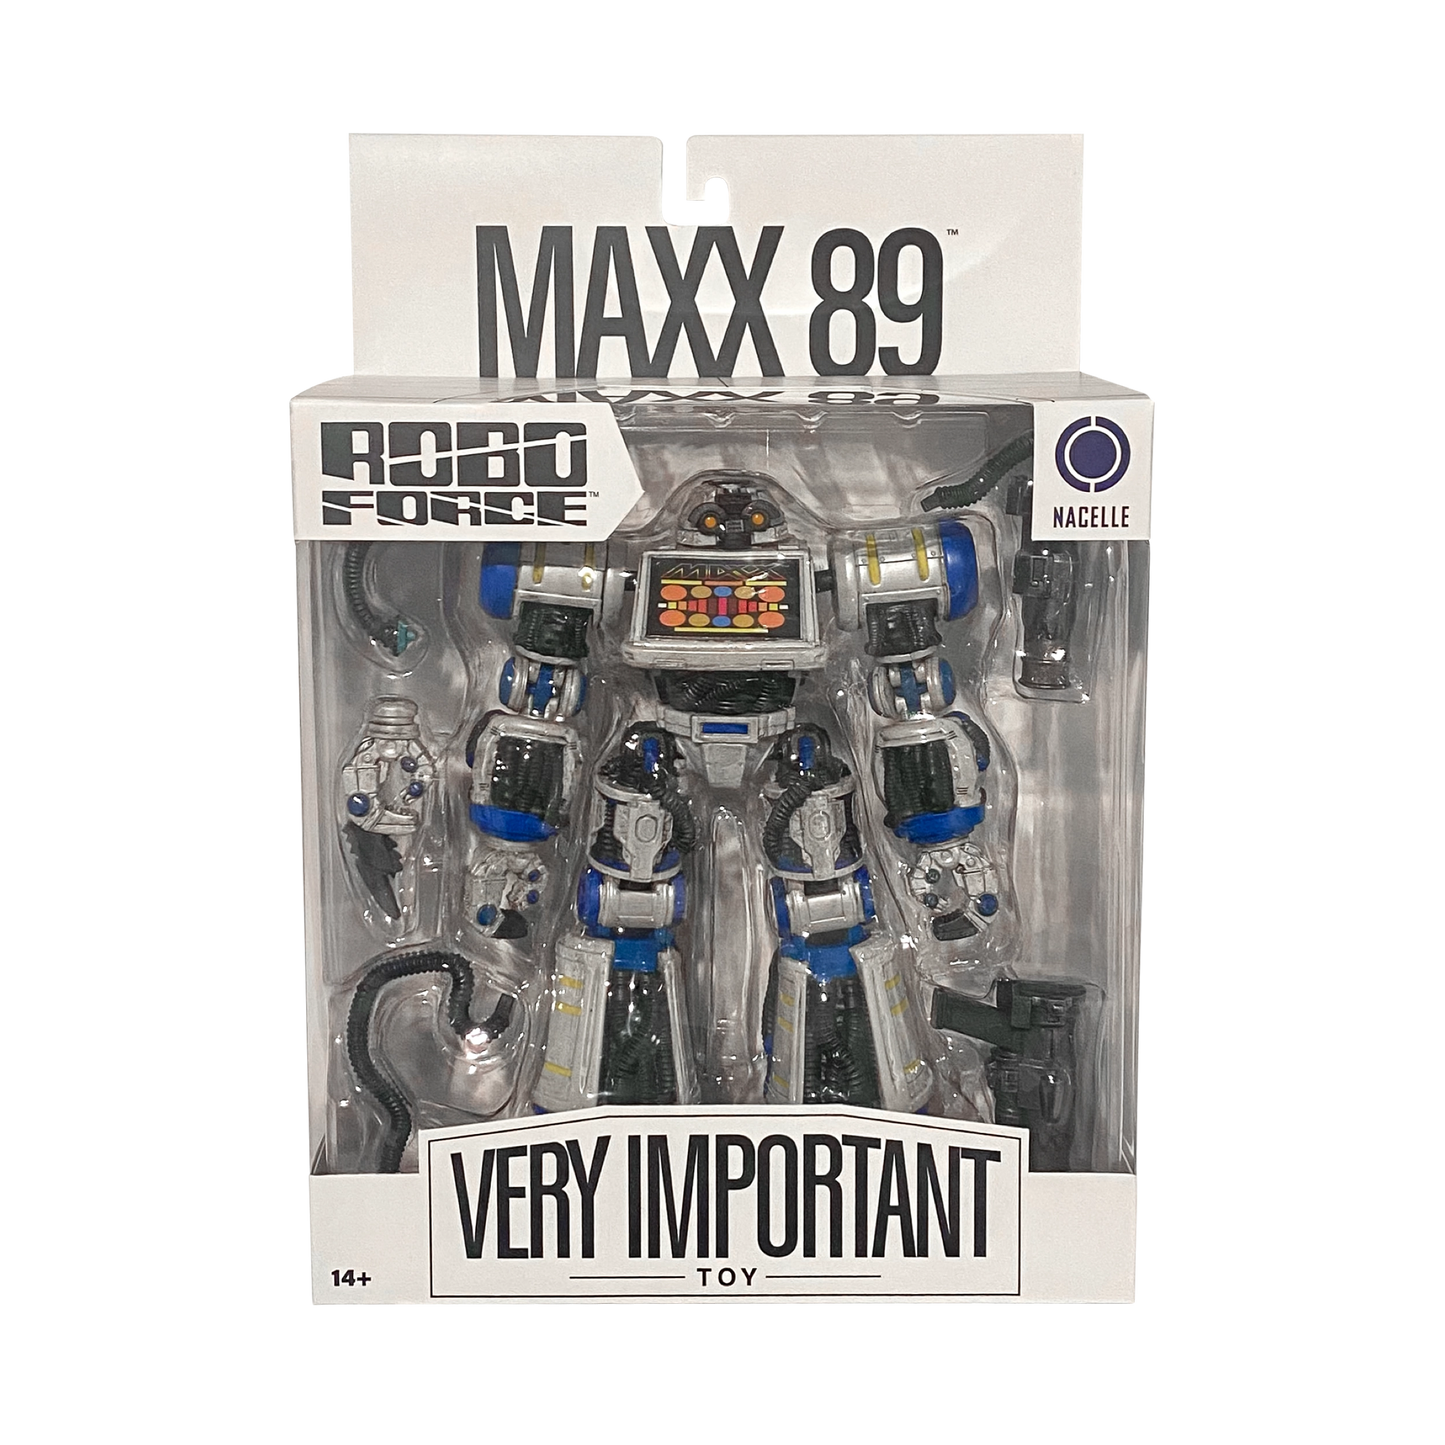 Maxx 89 collectible figure in production box